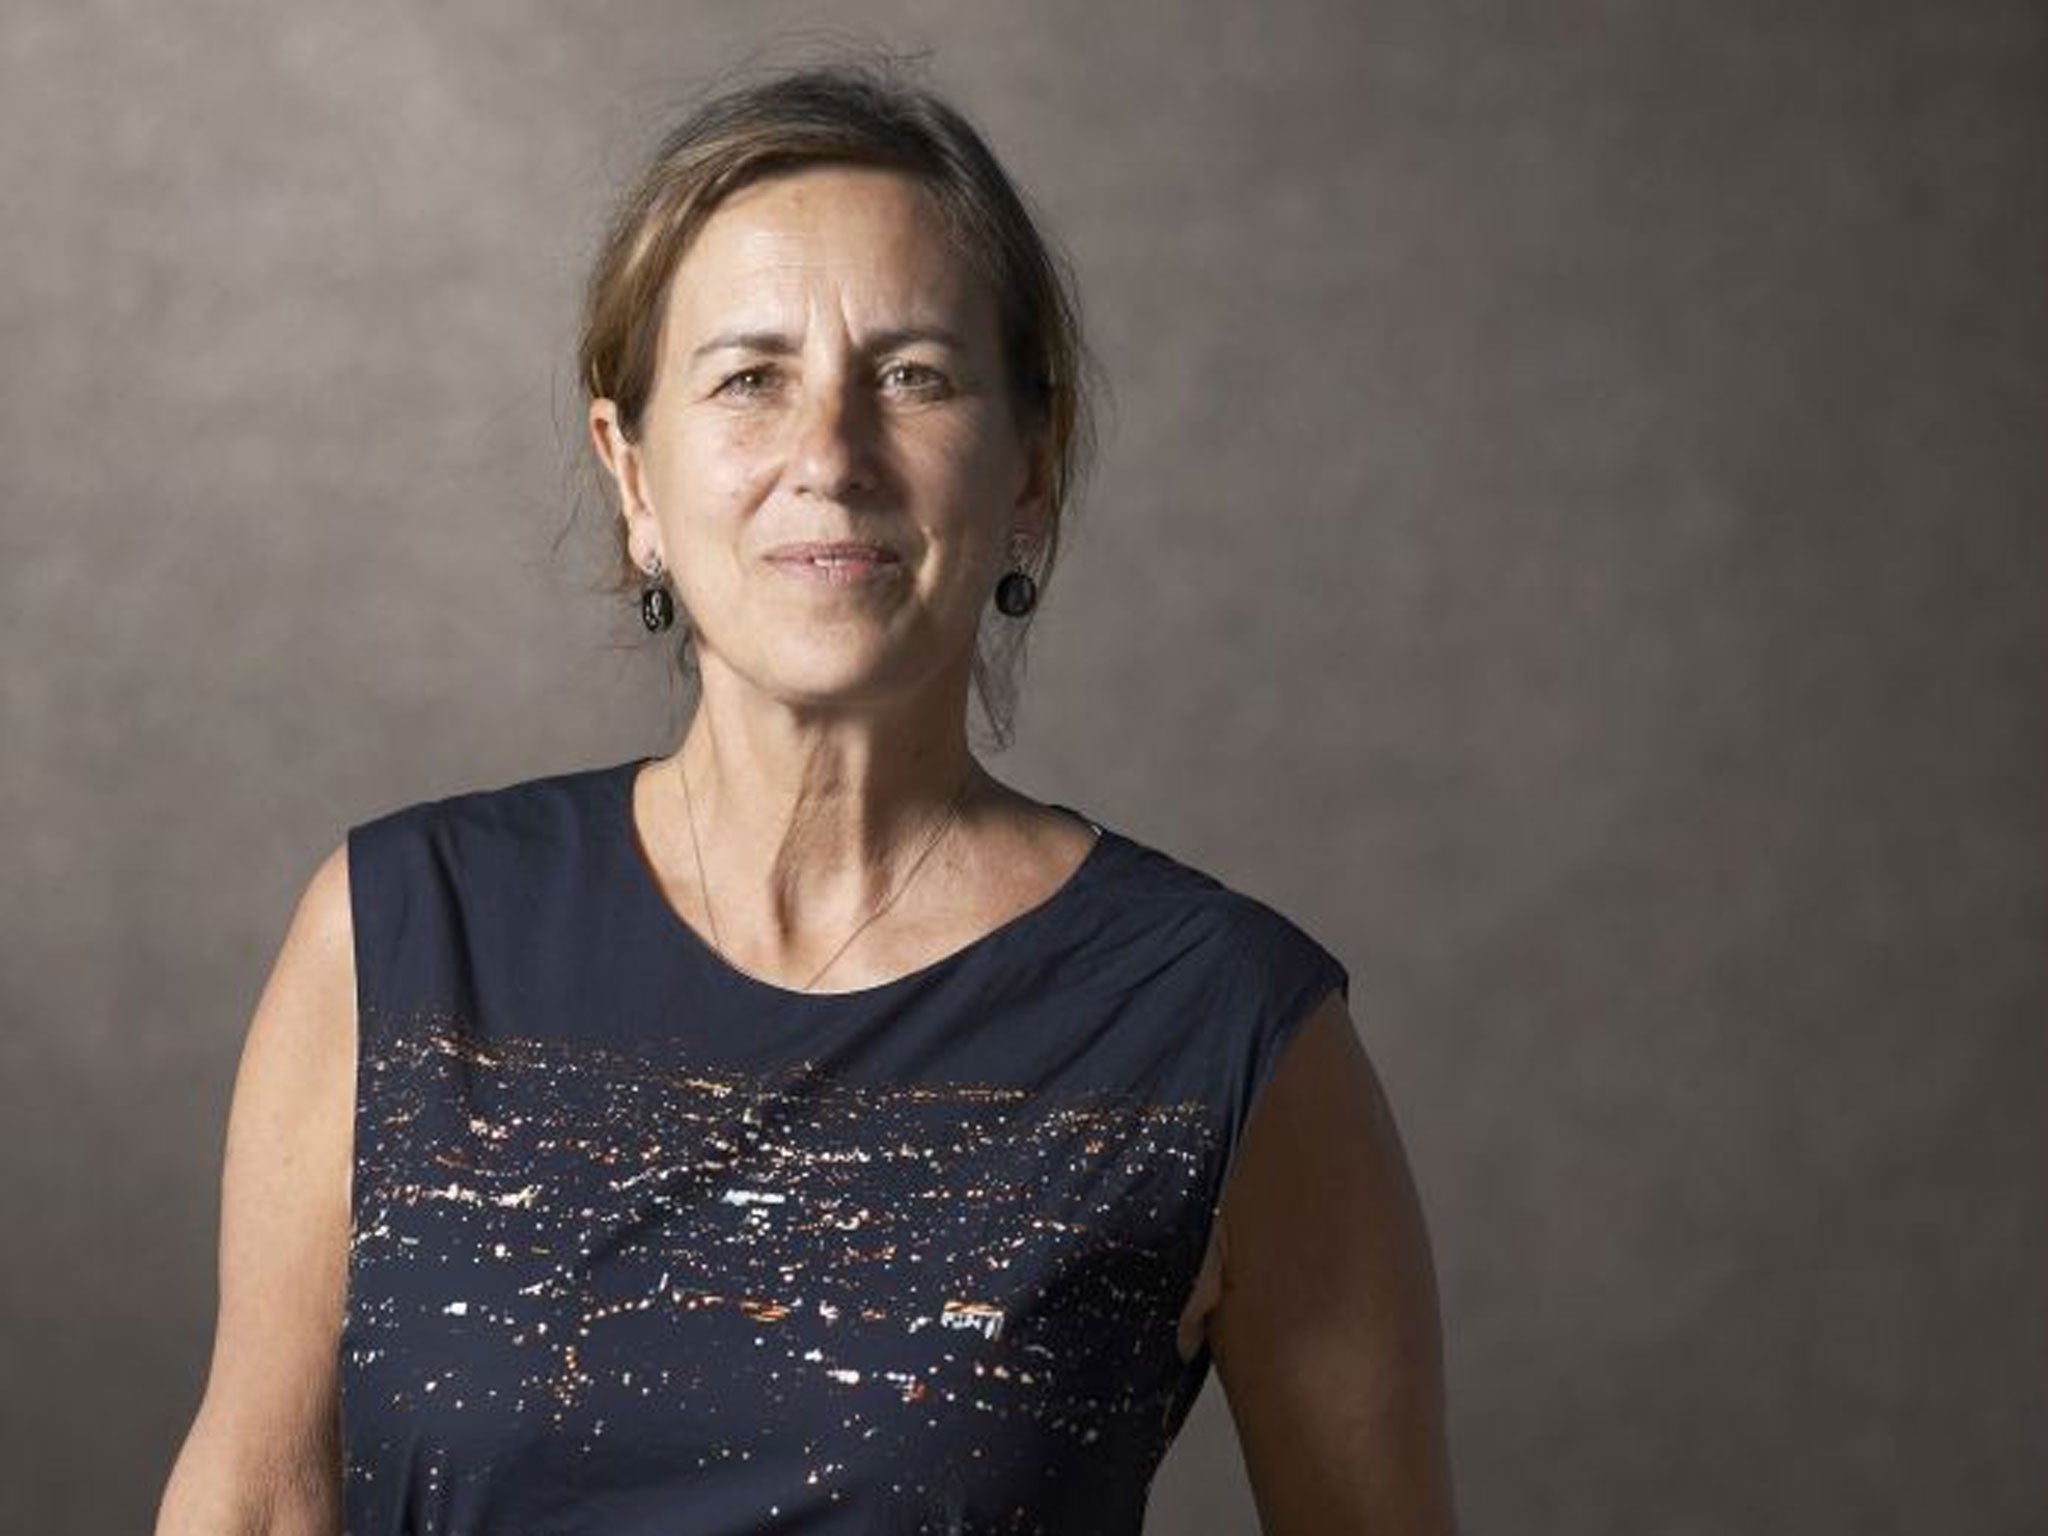 Kirsty Wark is critical of television’s ‘unbelievable’ gender